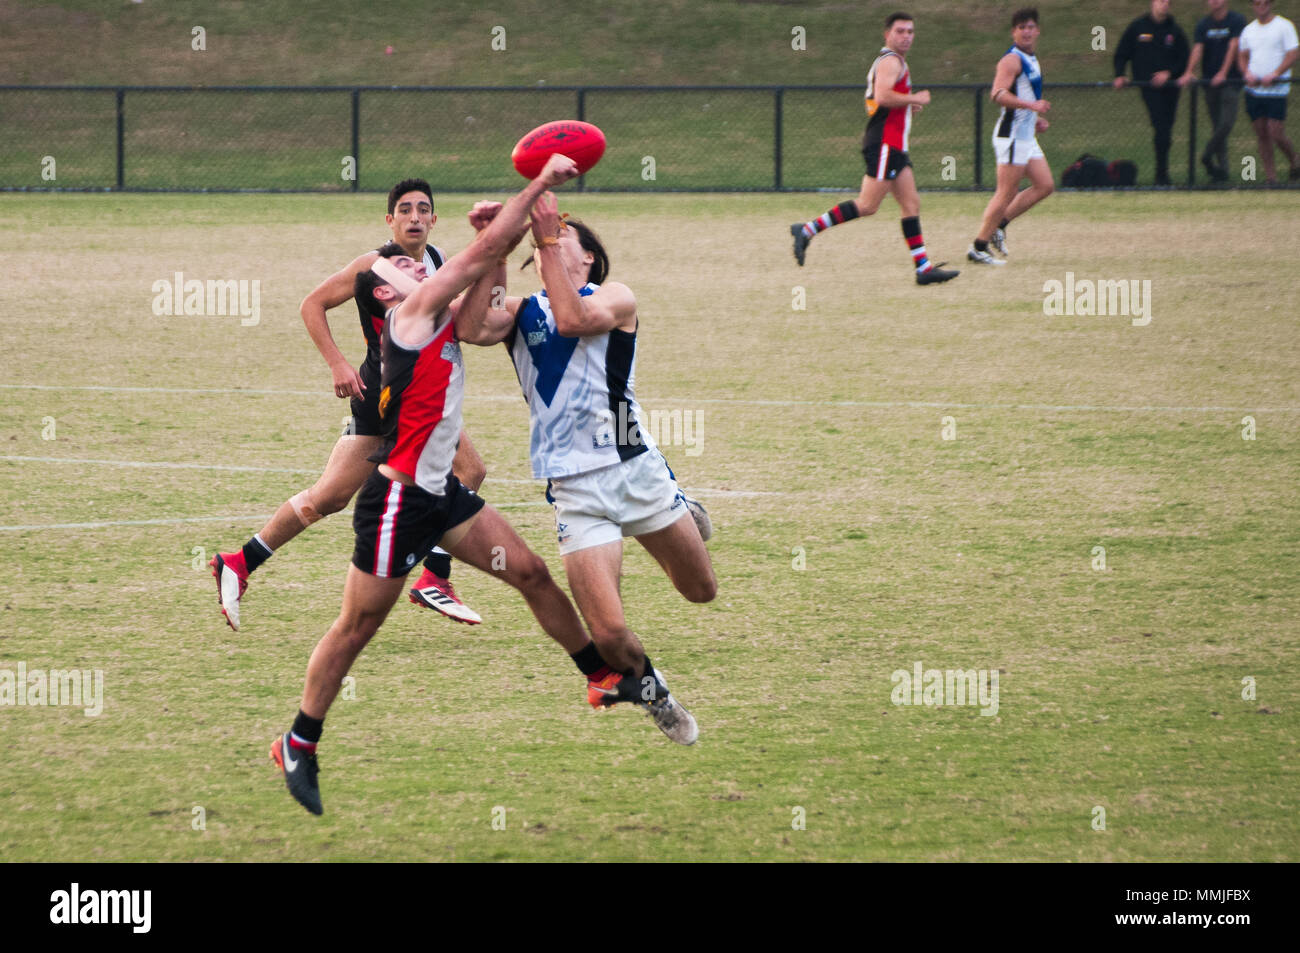 Australian Rules amateur football match at Princes Park, South Caulfield, Melbourne. The 'Aussie Rules' code originated in 19th century Melbourne. Stock Photo